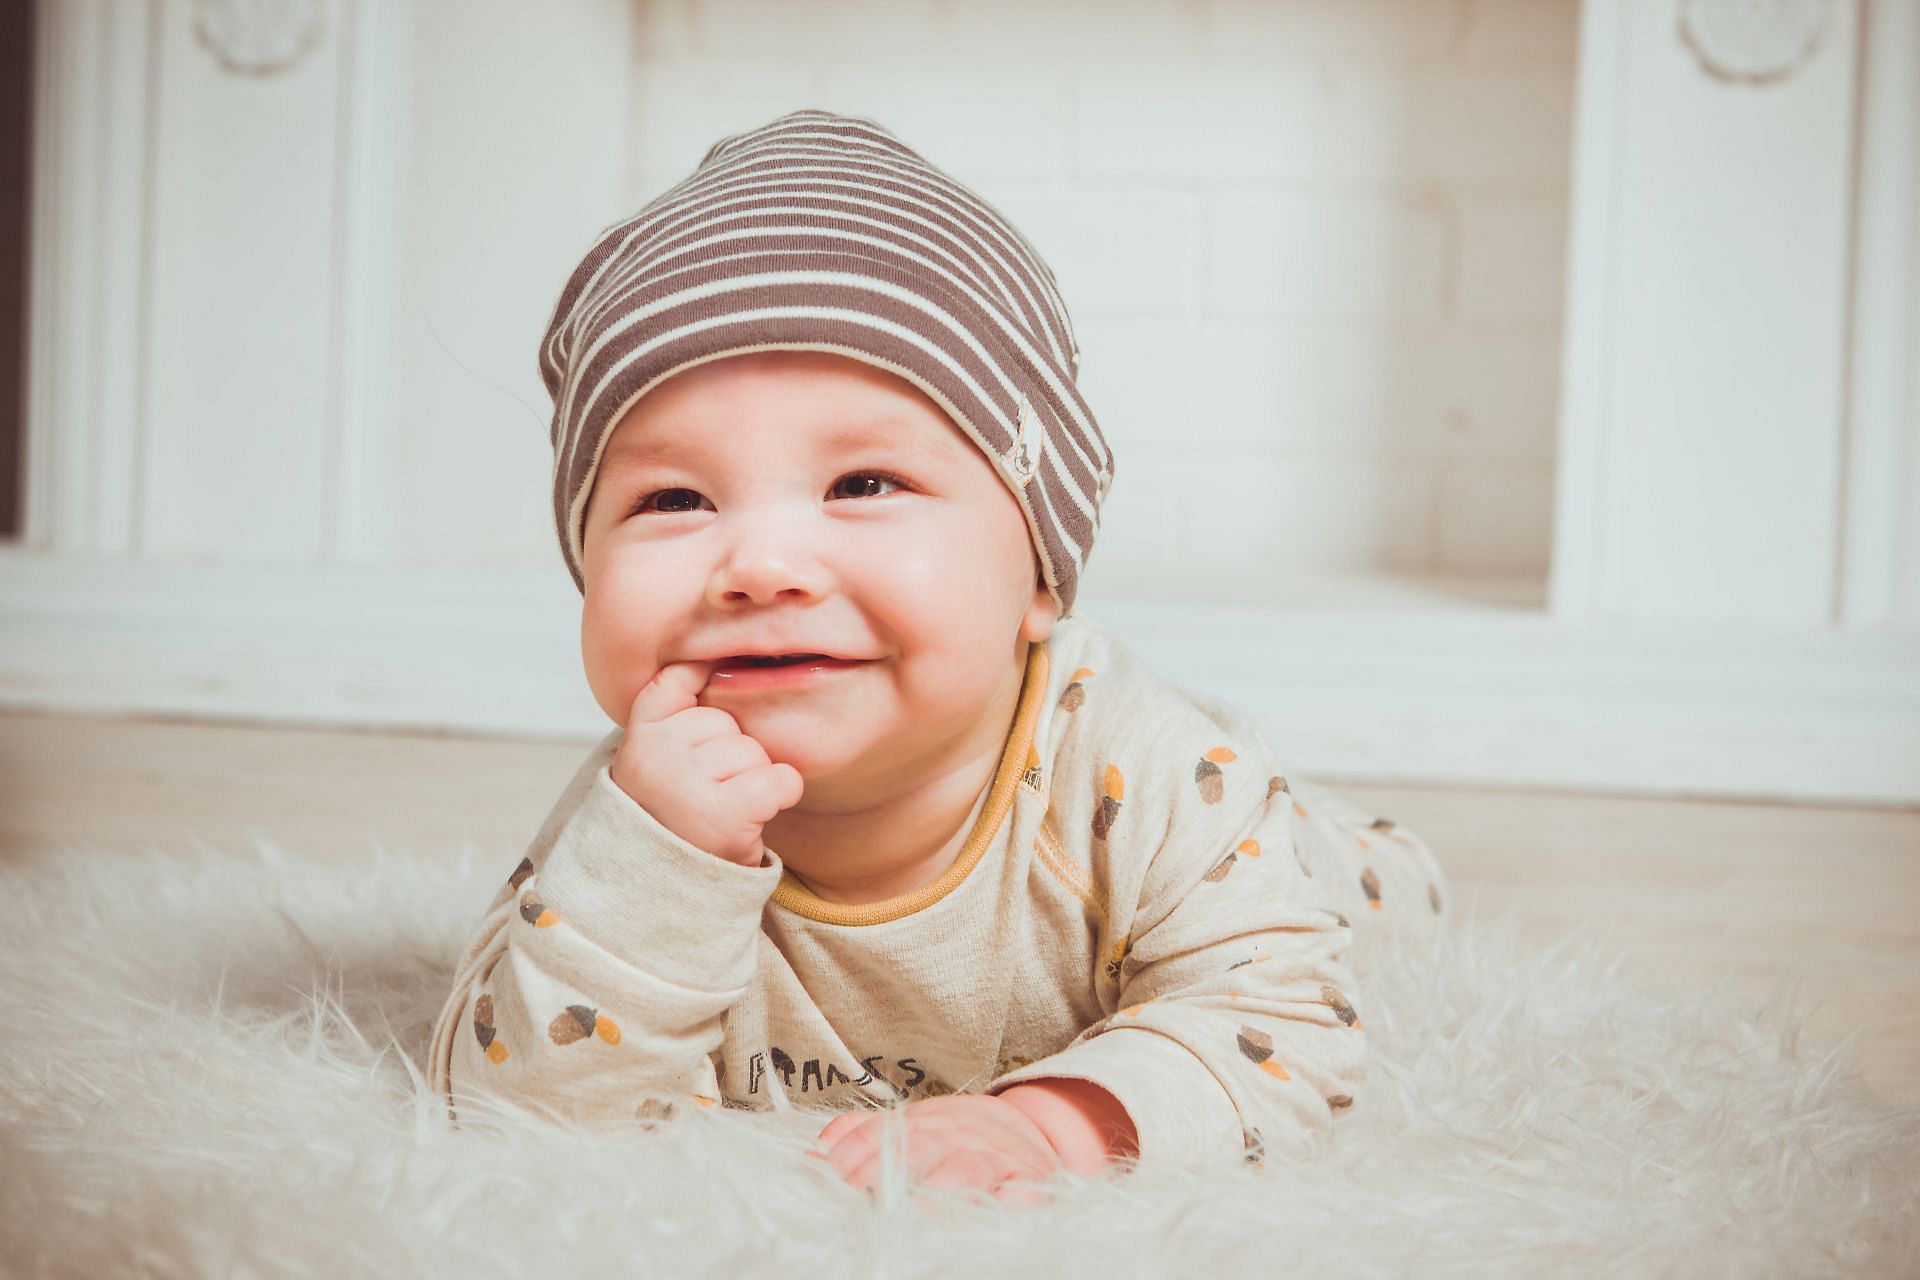 Importance of cradle cap home remedies (Image sourced via Pexels / Photo by vika)